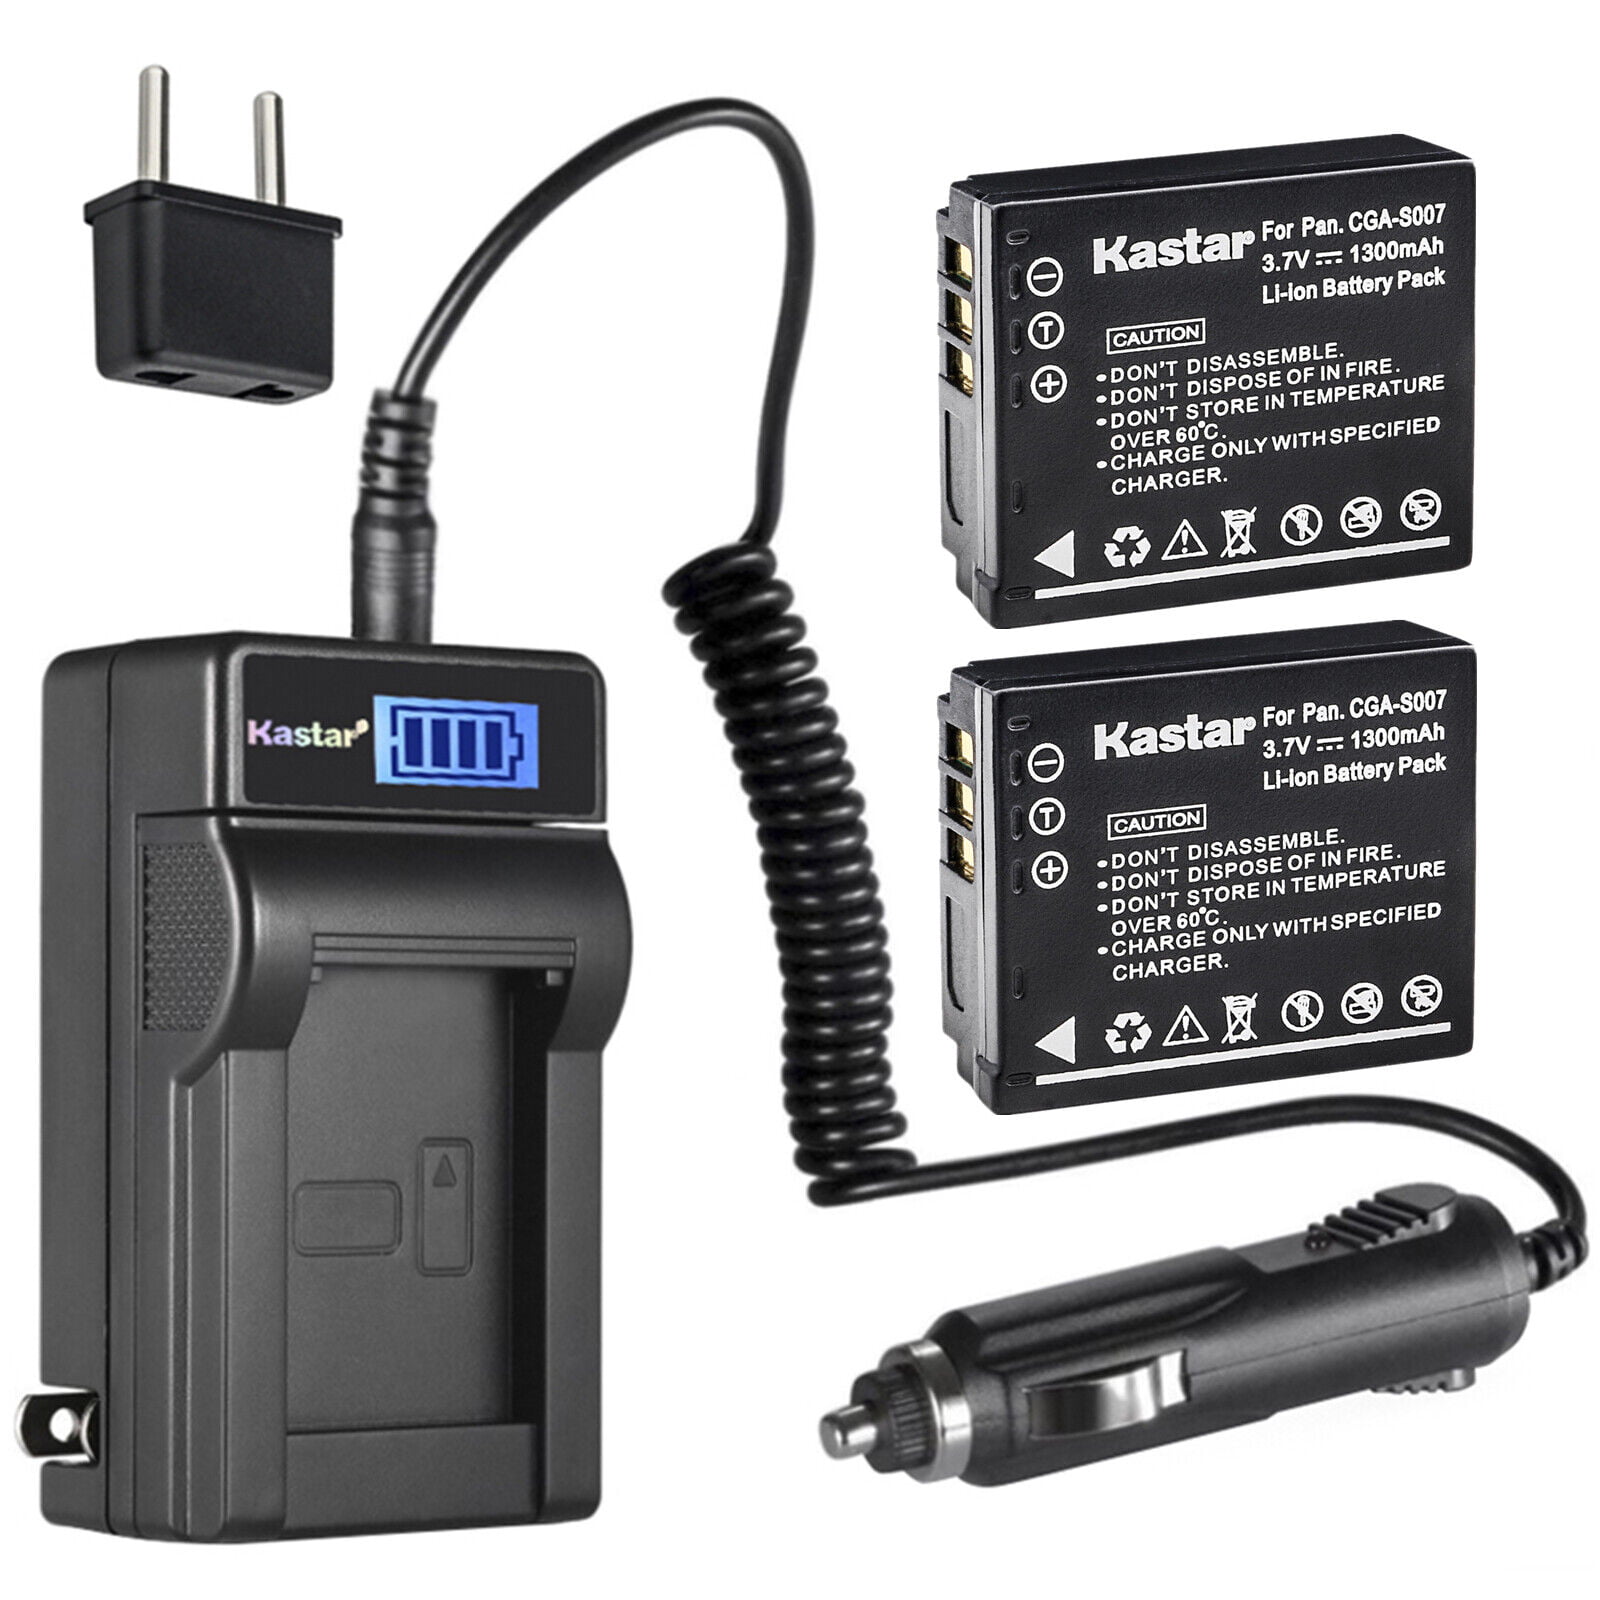 Zeep Gehoorzaam meer Kastar 1-Pack CGA-S007 Battery and LCD AC Charger Compatible with Panasonic  LUMIX DMC-TZ5S, LUMIX DMC-TZ11, LUMIX DMC-TZ15, LUMIX DMC-TZ50, LUMIX DMC-TZ50K,  LUMIX DMC-TZ50S, CGR-S007, DMW-BCD10 - Walmart.com